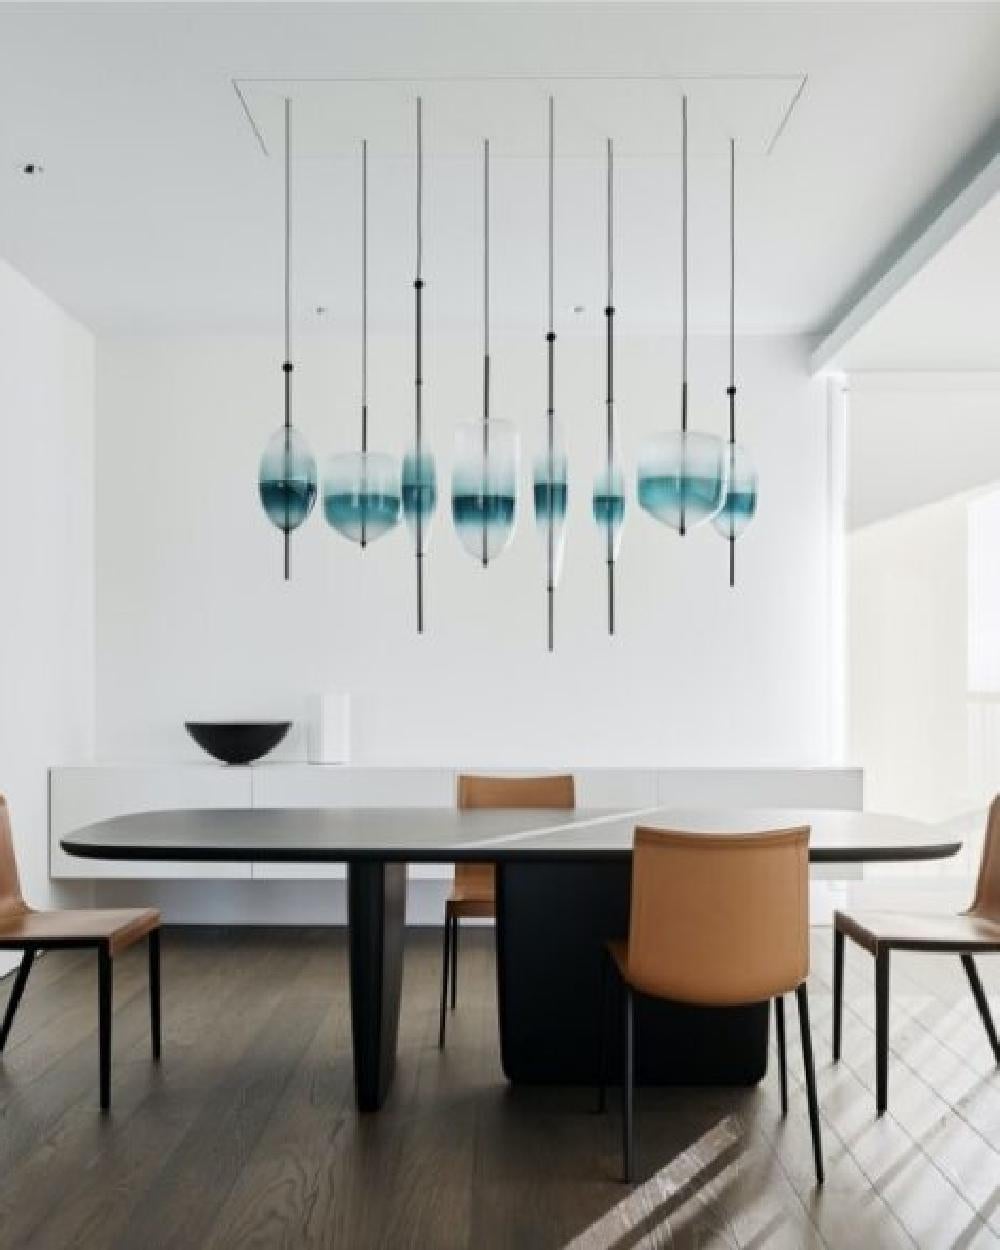 Metal FLOW[T] S2 Pendant lamp in Turquoise by Nao Tamura for Wonderglass For Sale